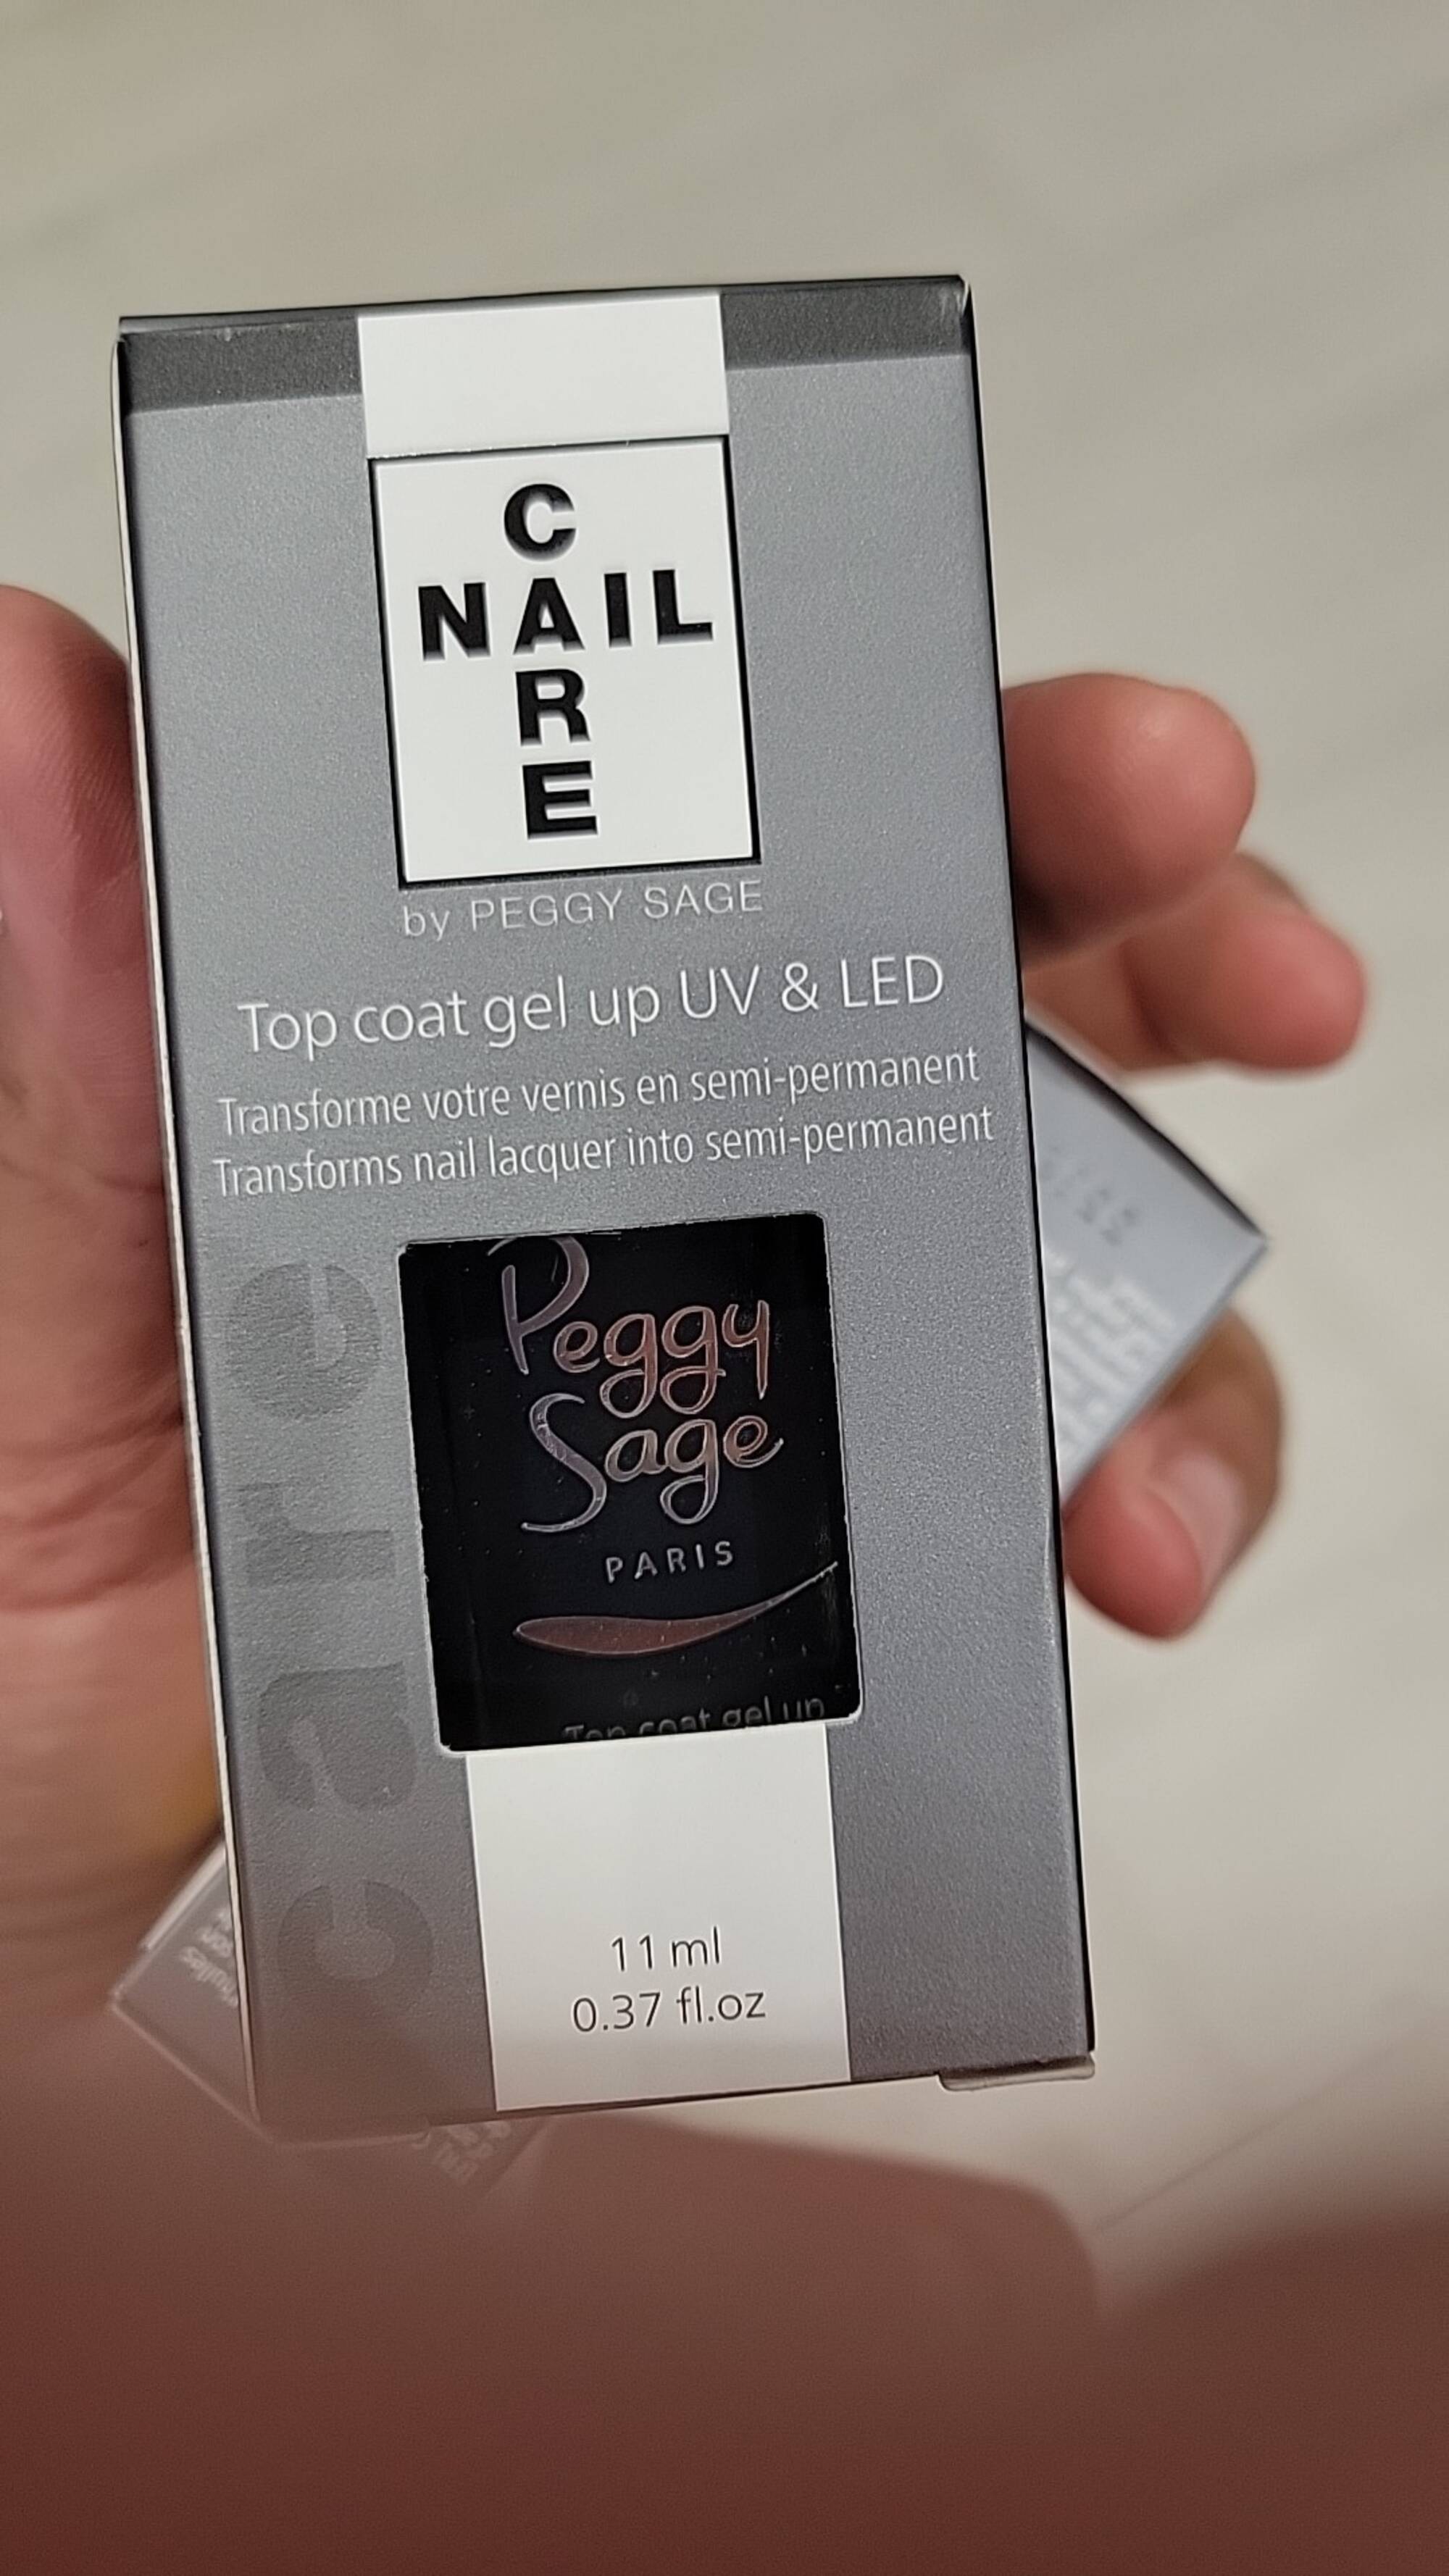 PEGGY SAGE - Caire nail - Top coat gel up UV & LED